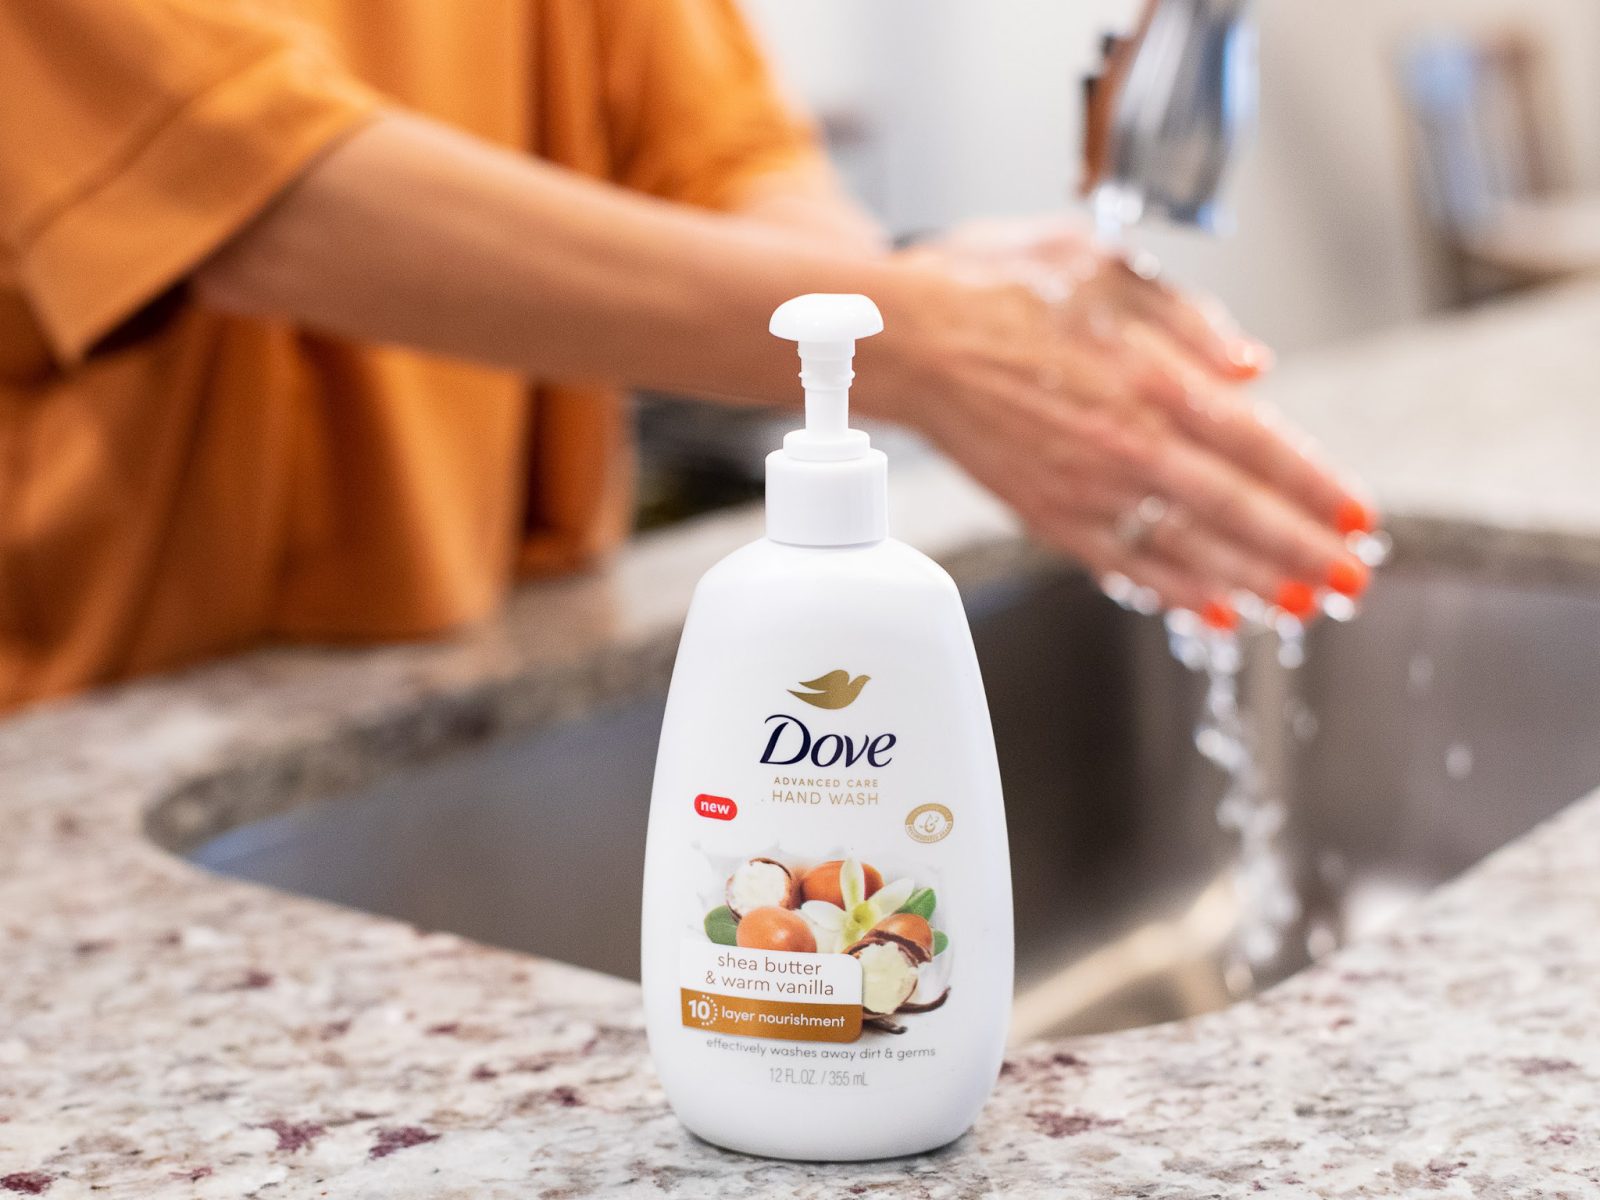 Get Dove Hand Wash For As Low As $3.79 At Kroger